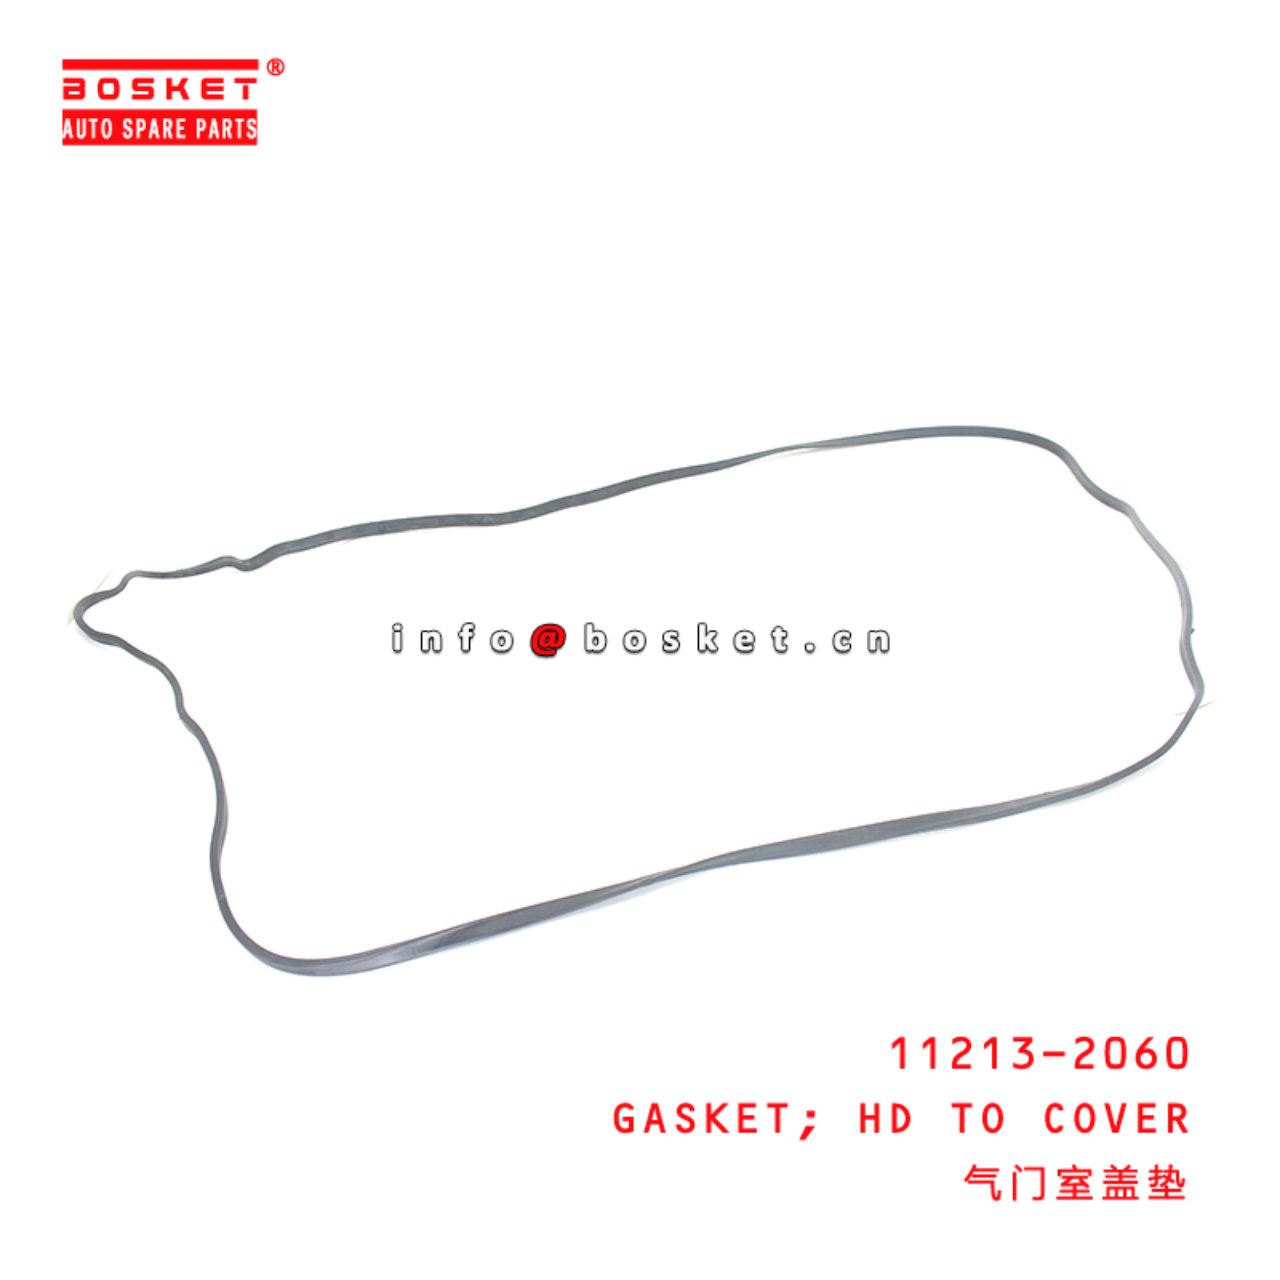 11213-2060 Head To Cover Gasket Suitable for ISUZU HINO E13C